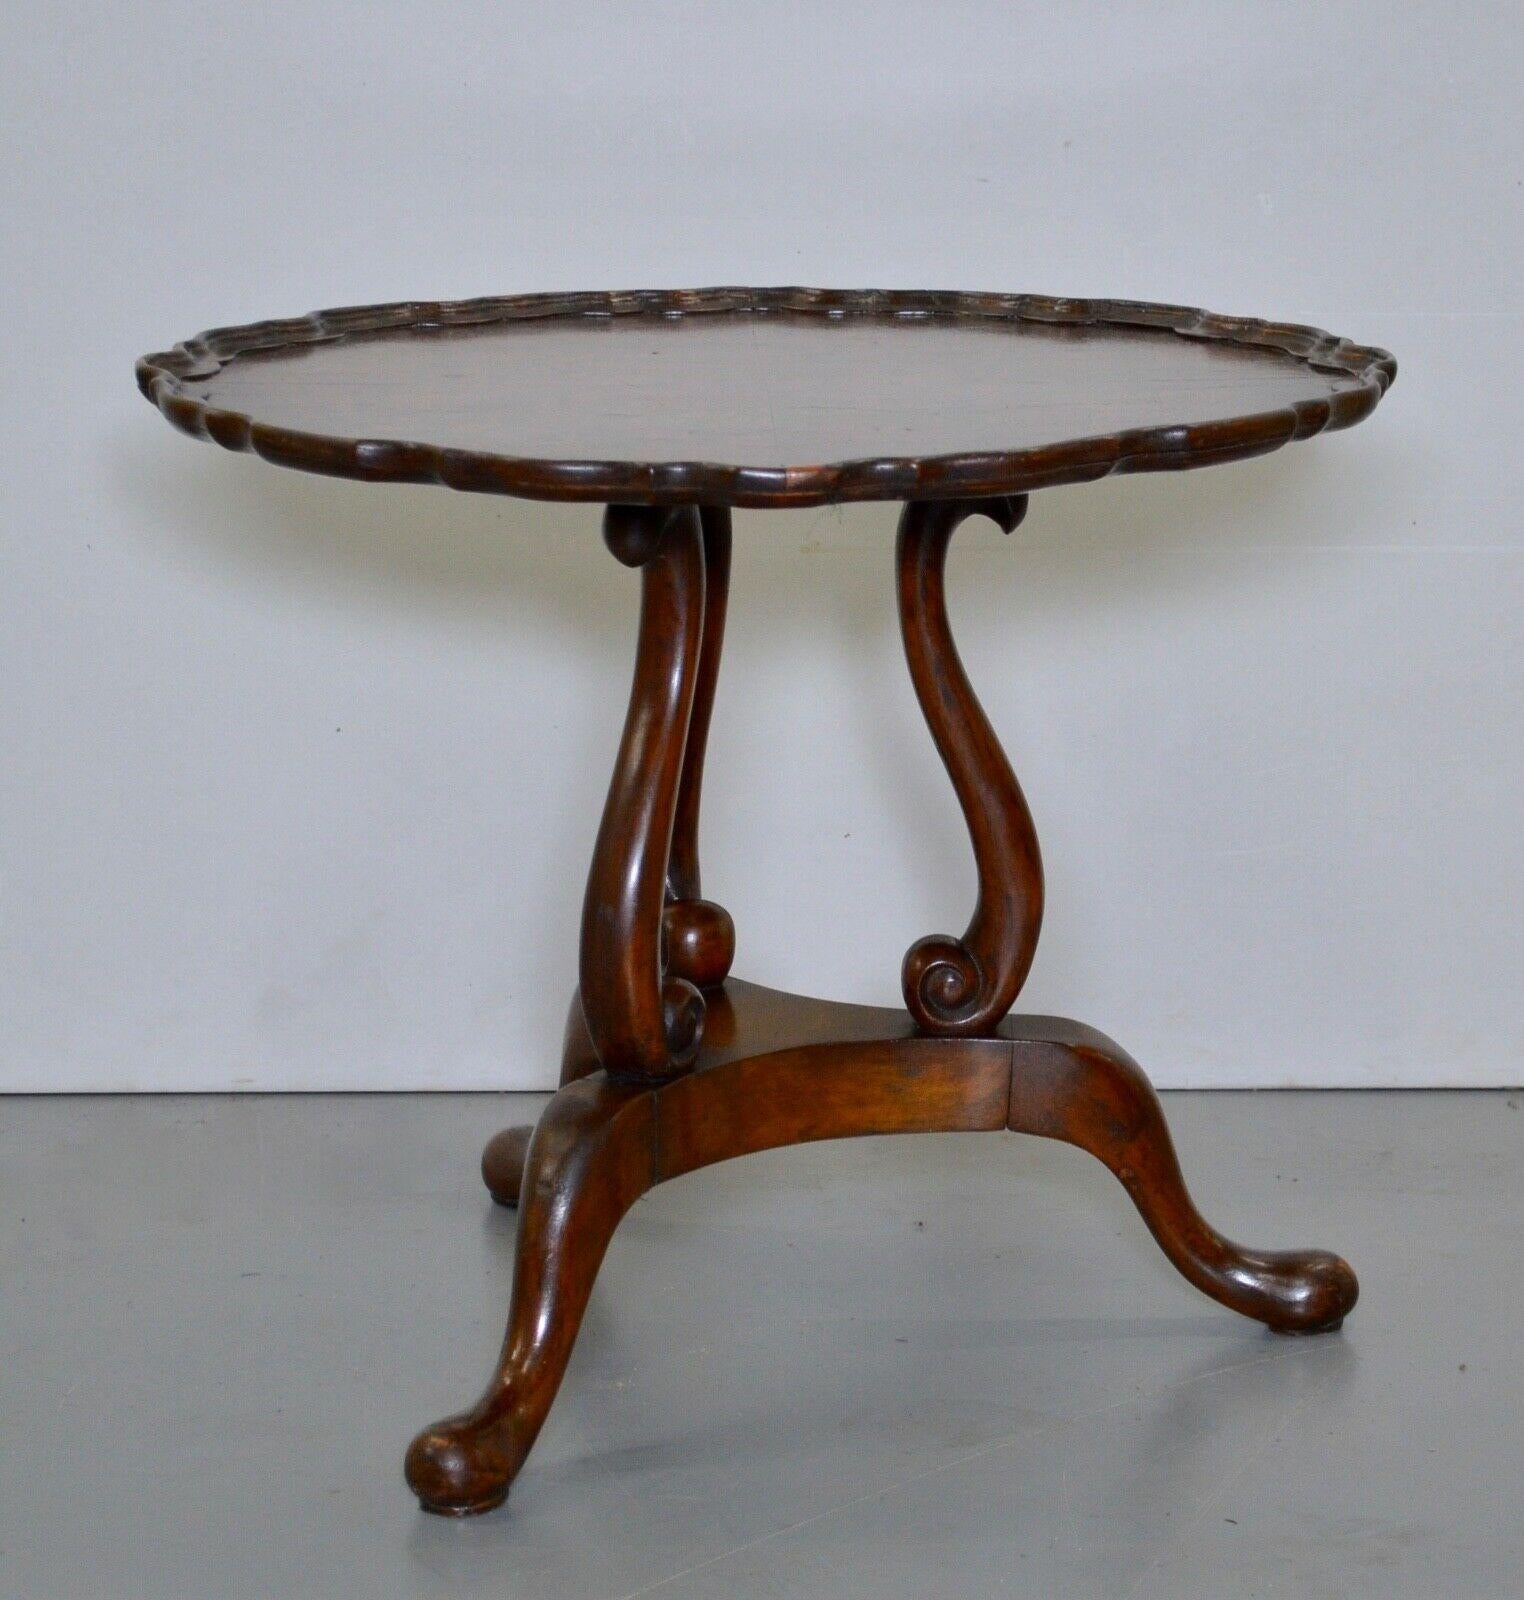 We are delighted to offer for sale this Georgian Burr Walnut Finished Coffee, Lamp Table. With piecrust top on three scroll supports and hipped splayed legs ending on pad feet. It is in excellent condition.

DIMENSIONS
Height : 49.5cm
Width :